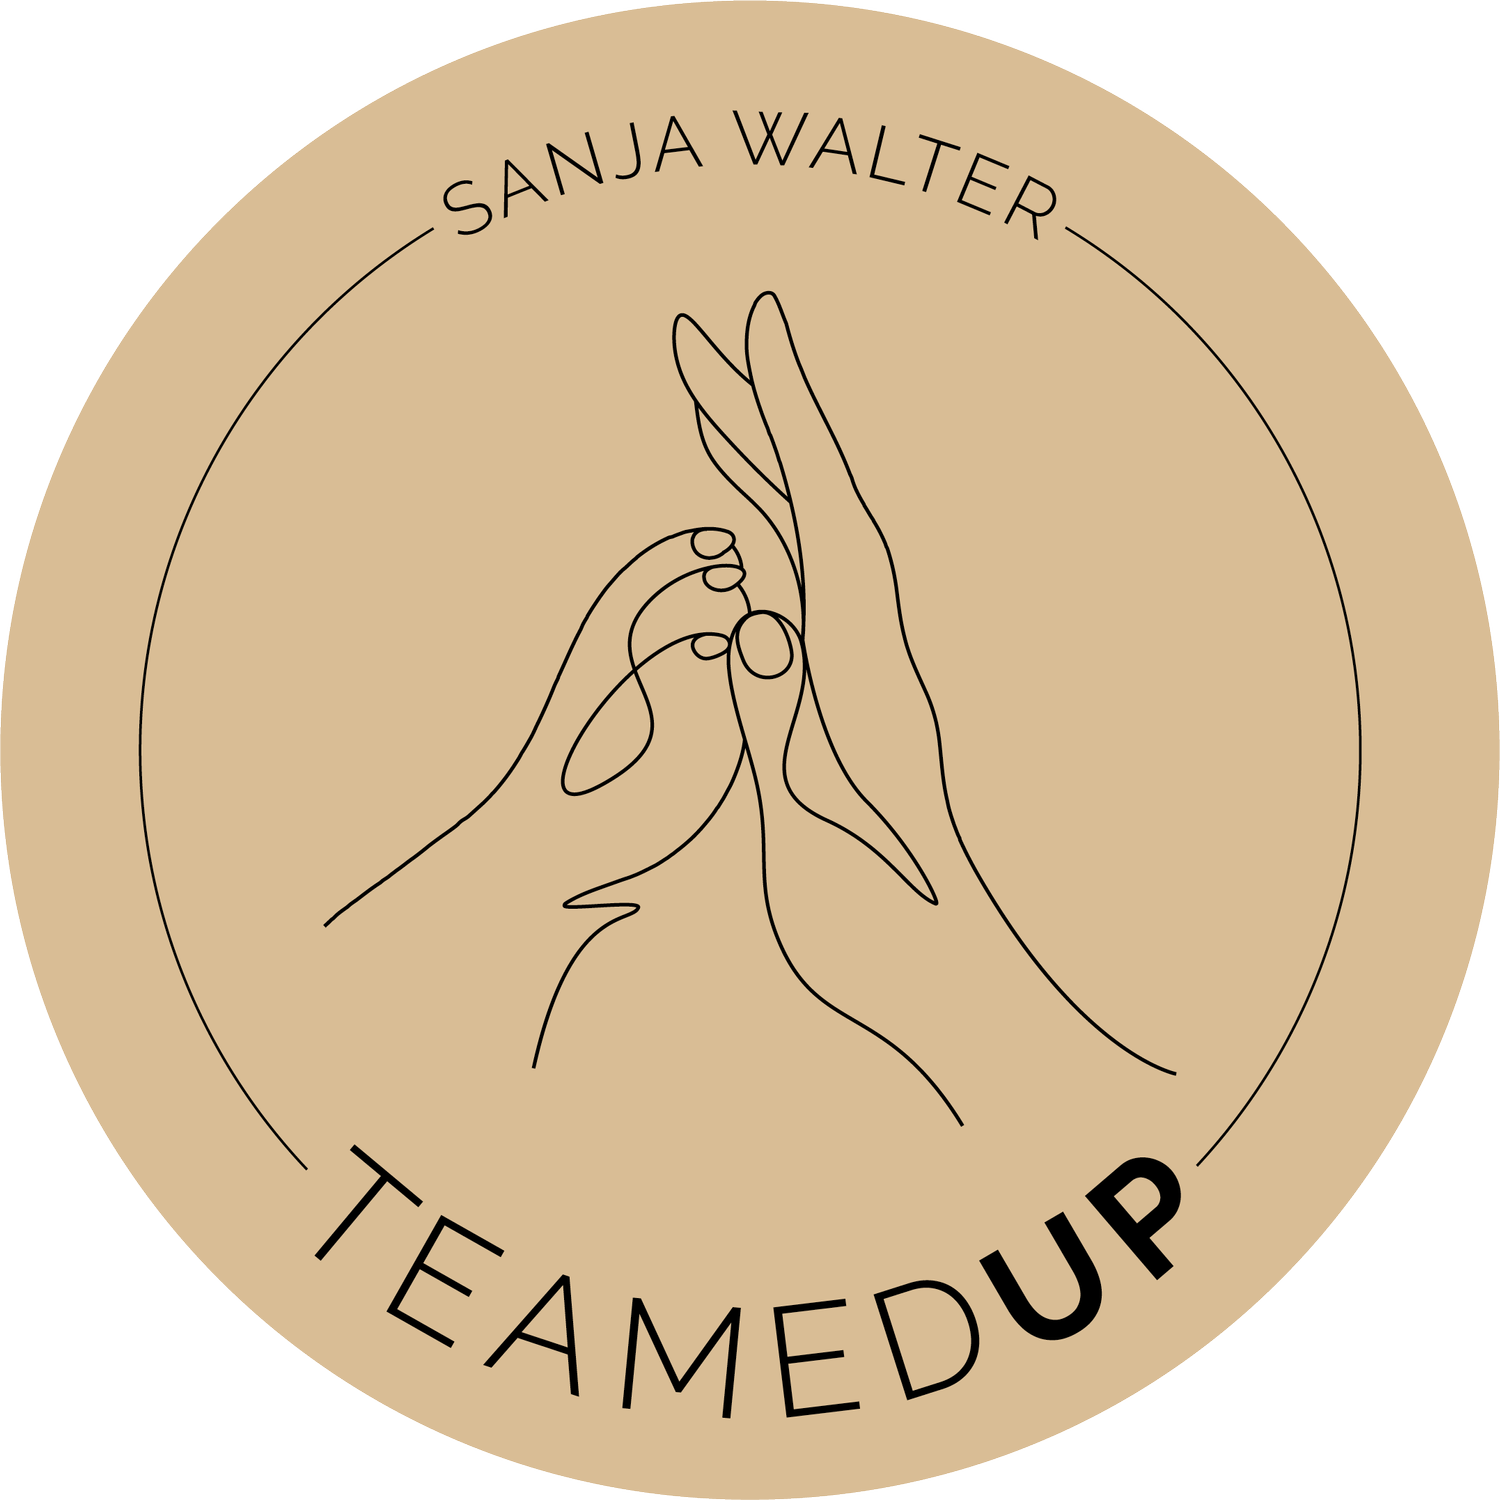 teamed up by Sanja Walter